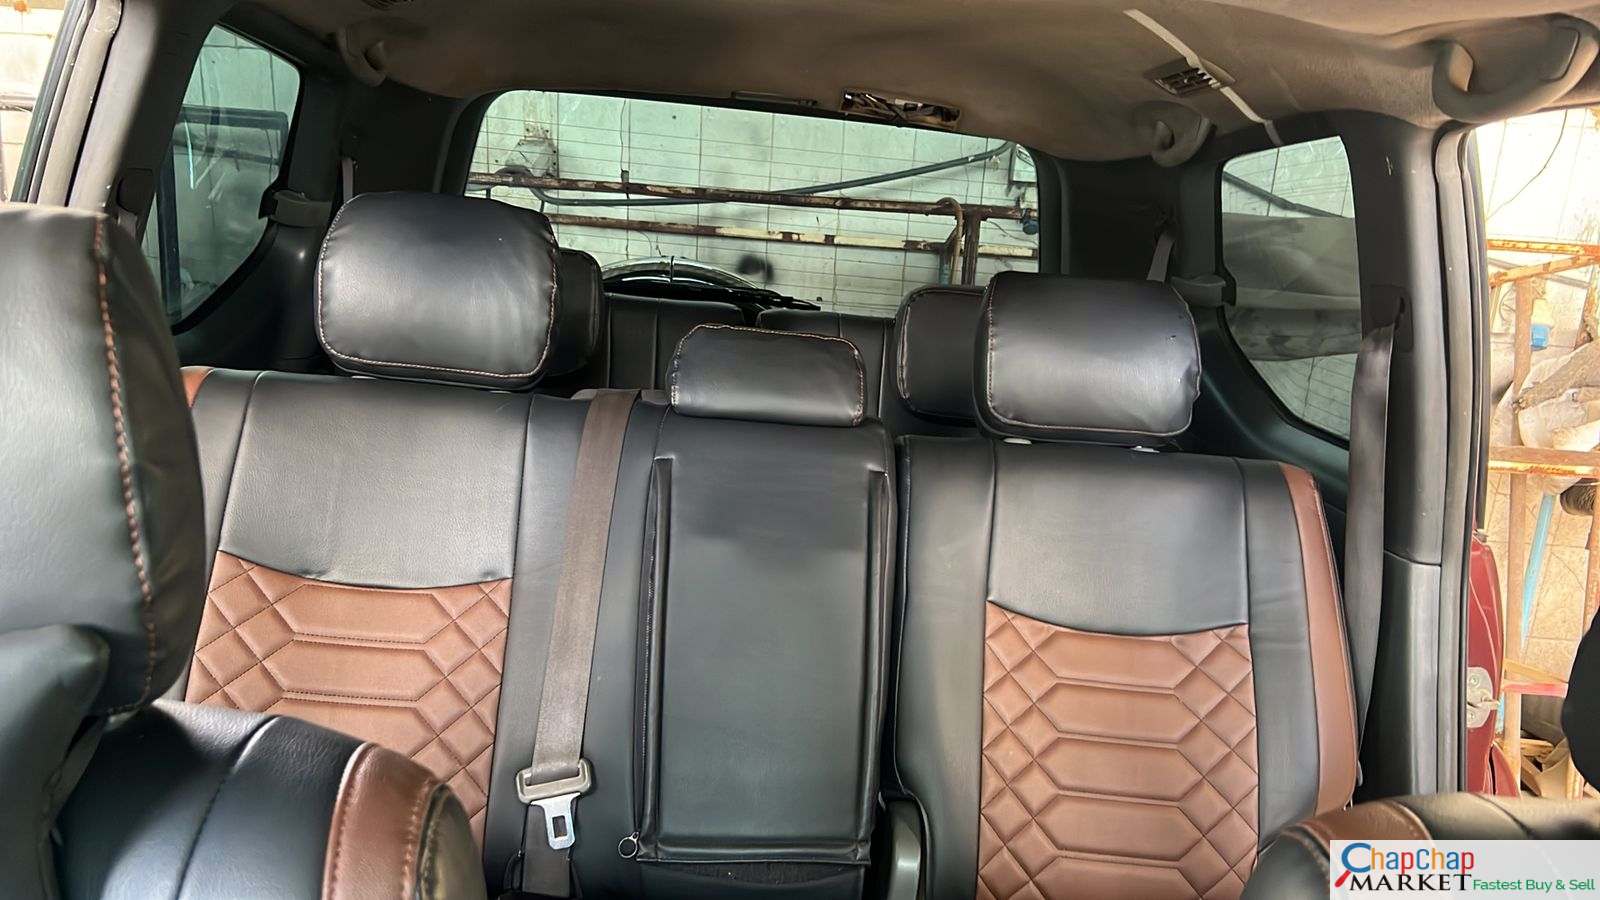 Toyota PRADO KDL Sunroof QUICK SALE YOU PAY 30% DEPOSIT TRADE IN OK EXCLUSIVE!